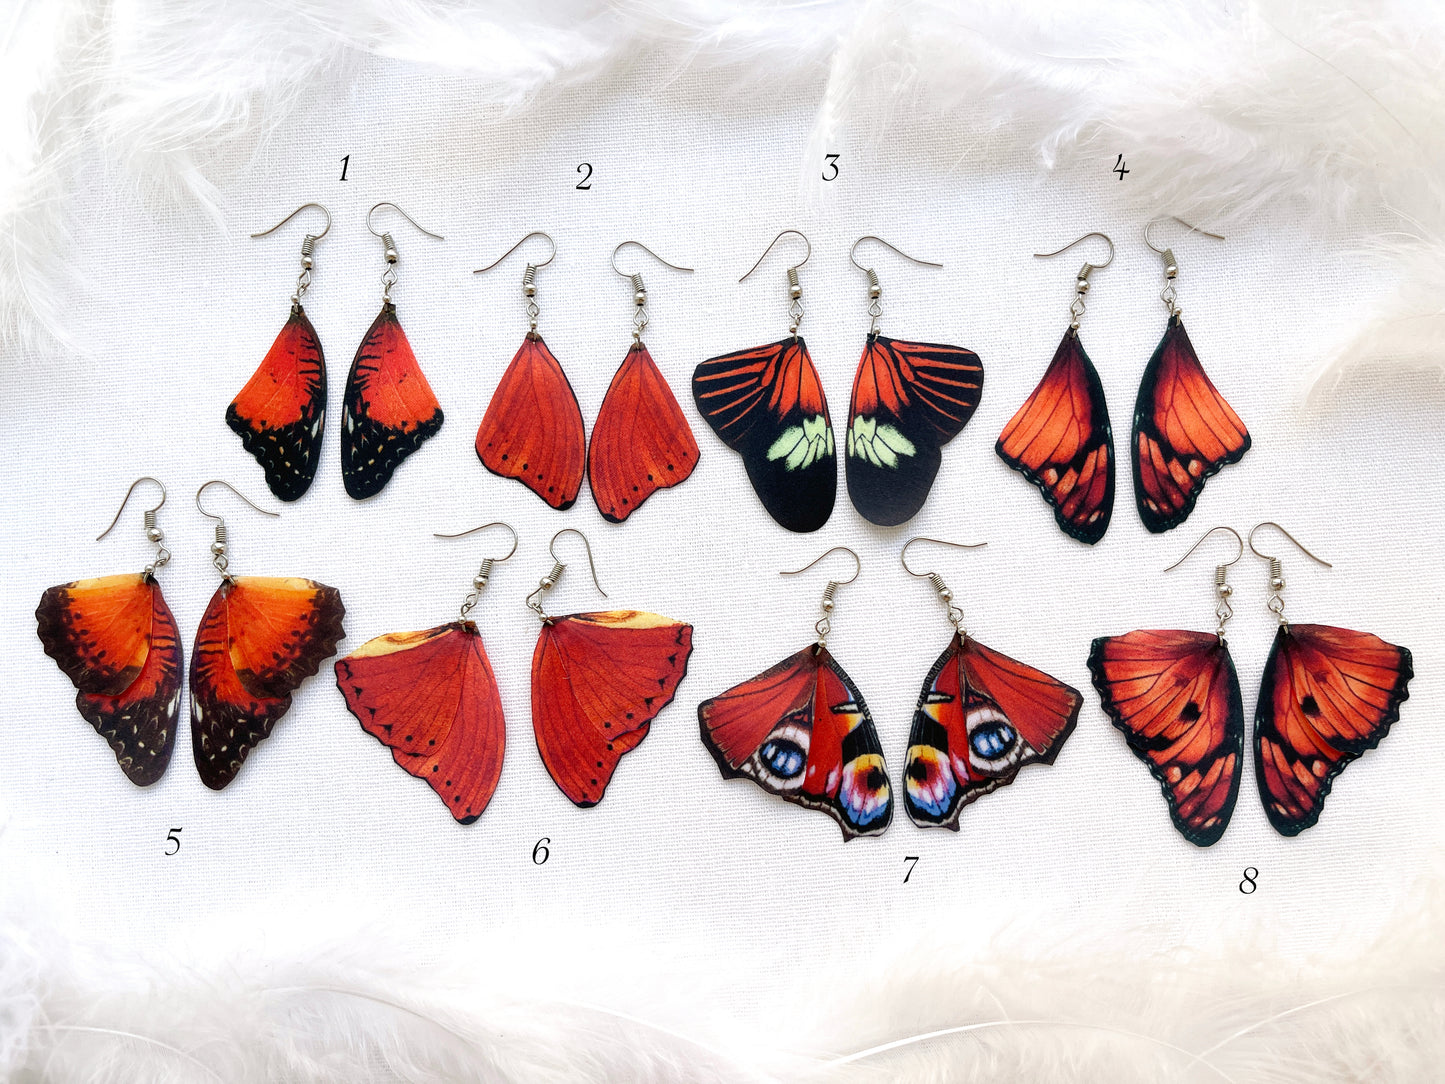 Bright Red Butterfly Earrings on White Background with FeathersRuby Red Butterfly Wing Earrings on display